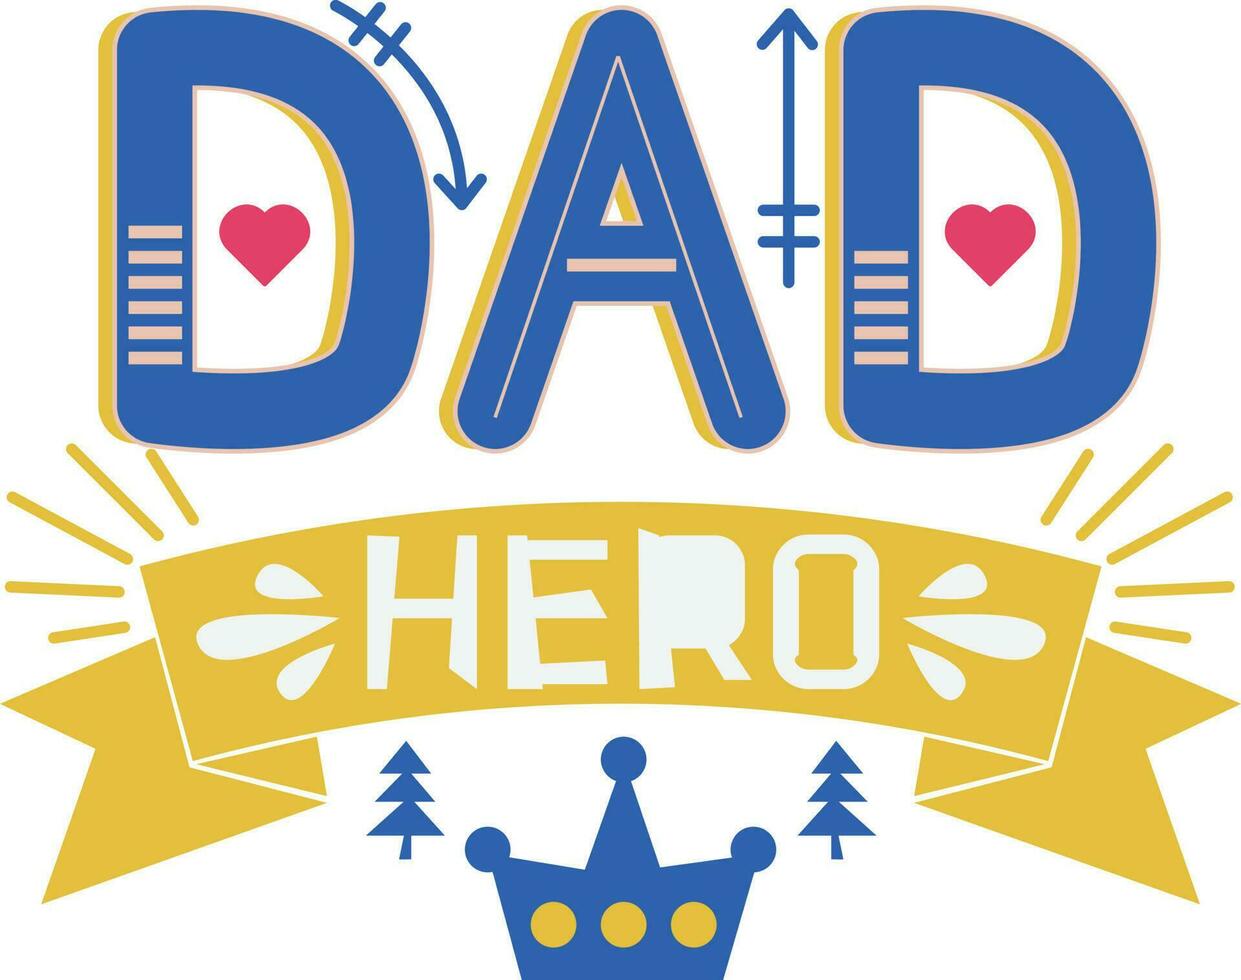 Happy Father's Day Card Typeface Symbol Sticker Art vector